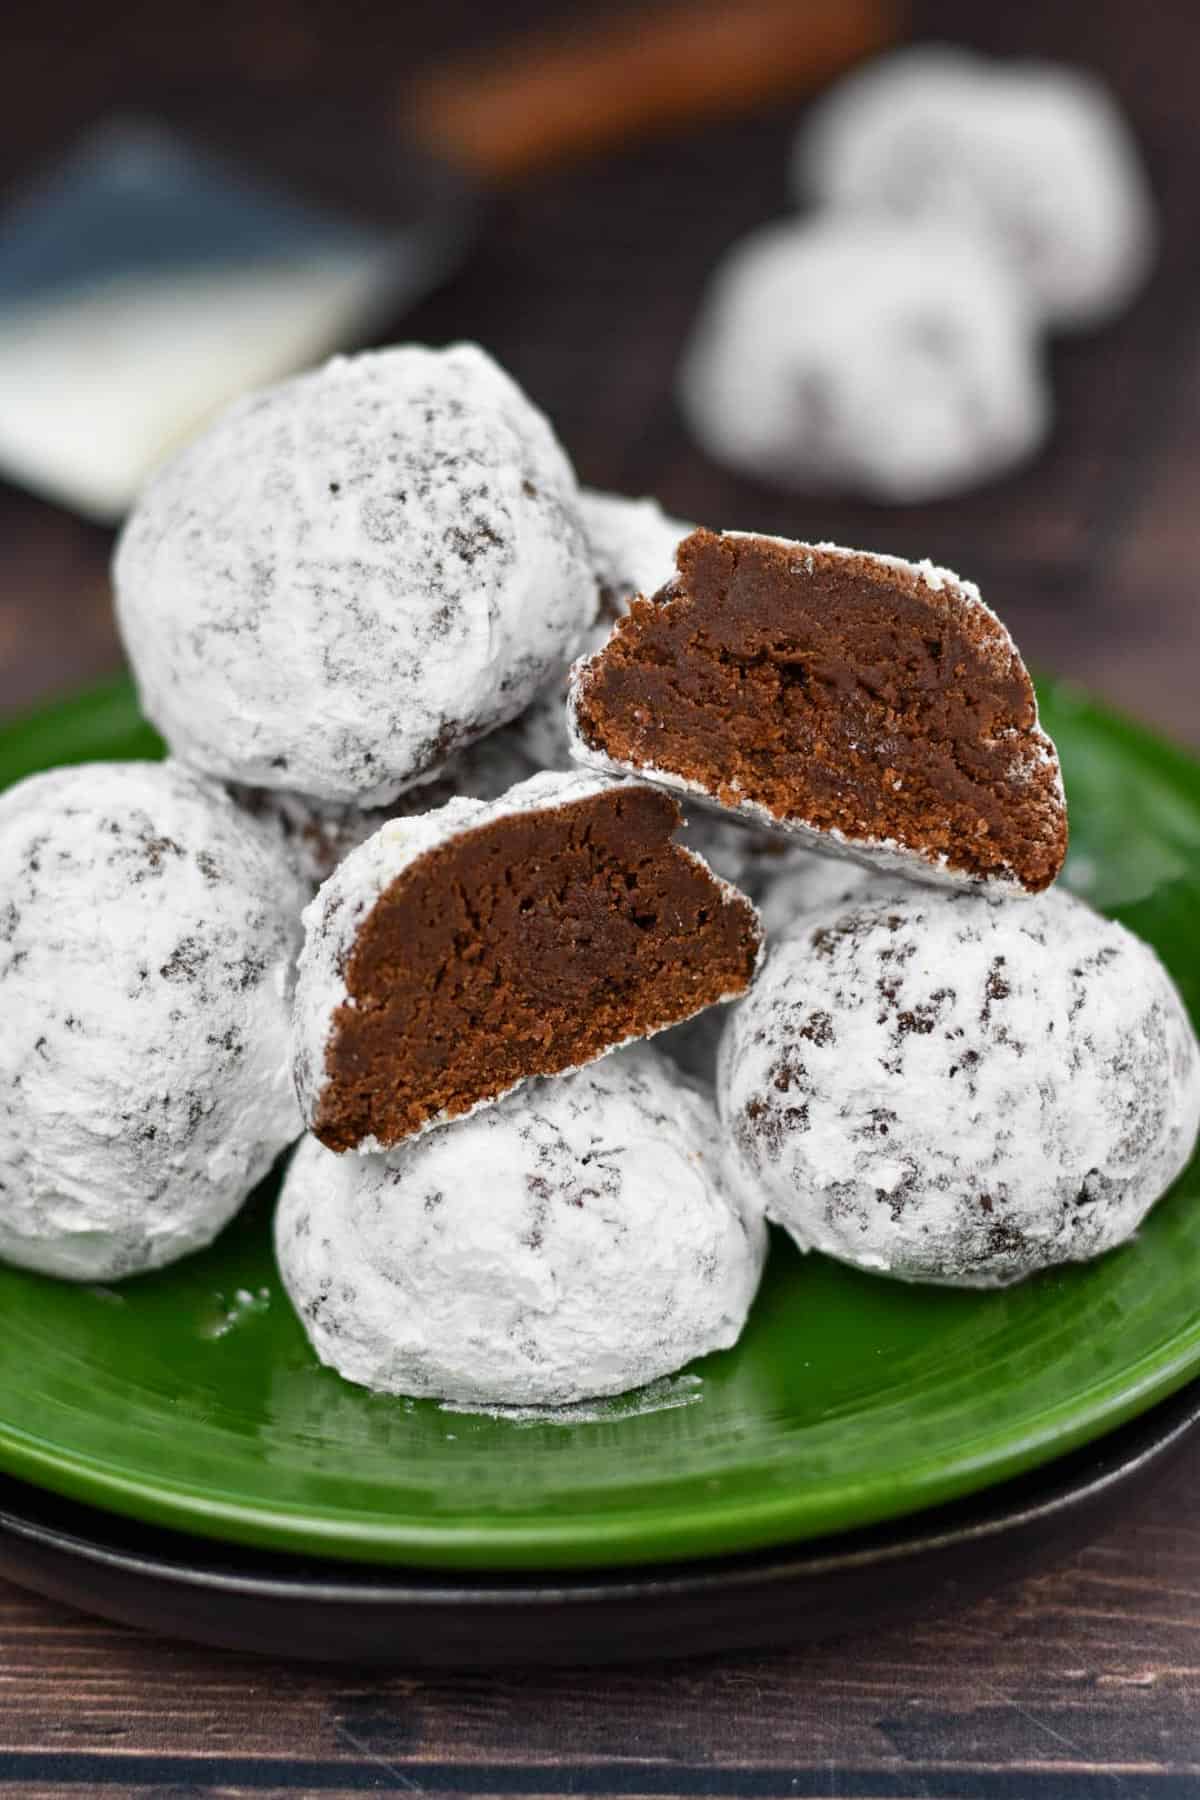 image of snowball cookies on a plate with one cookie cut open.